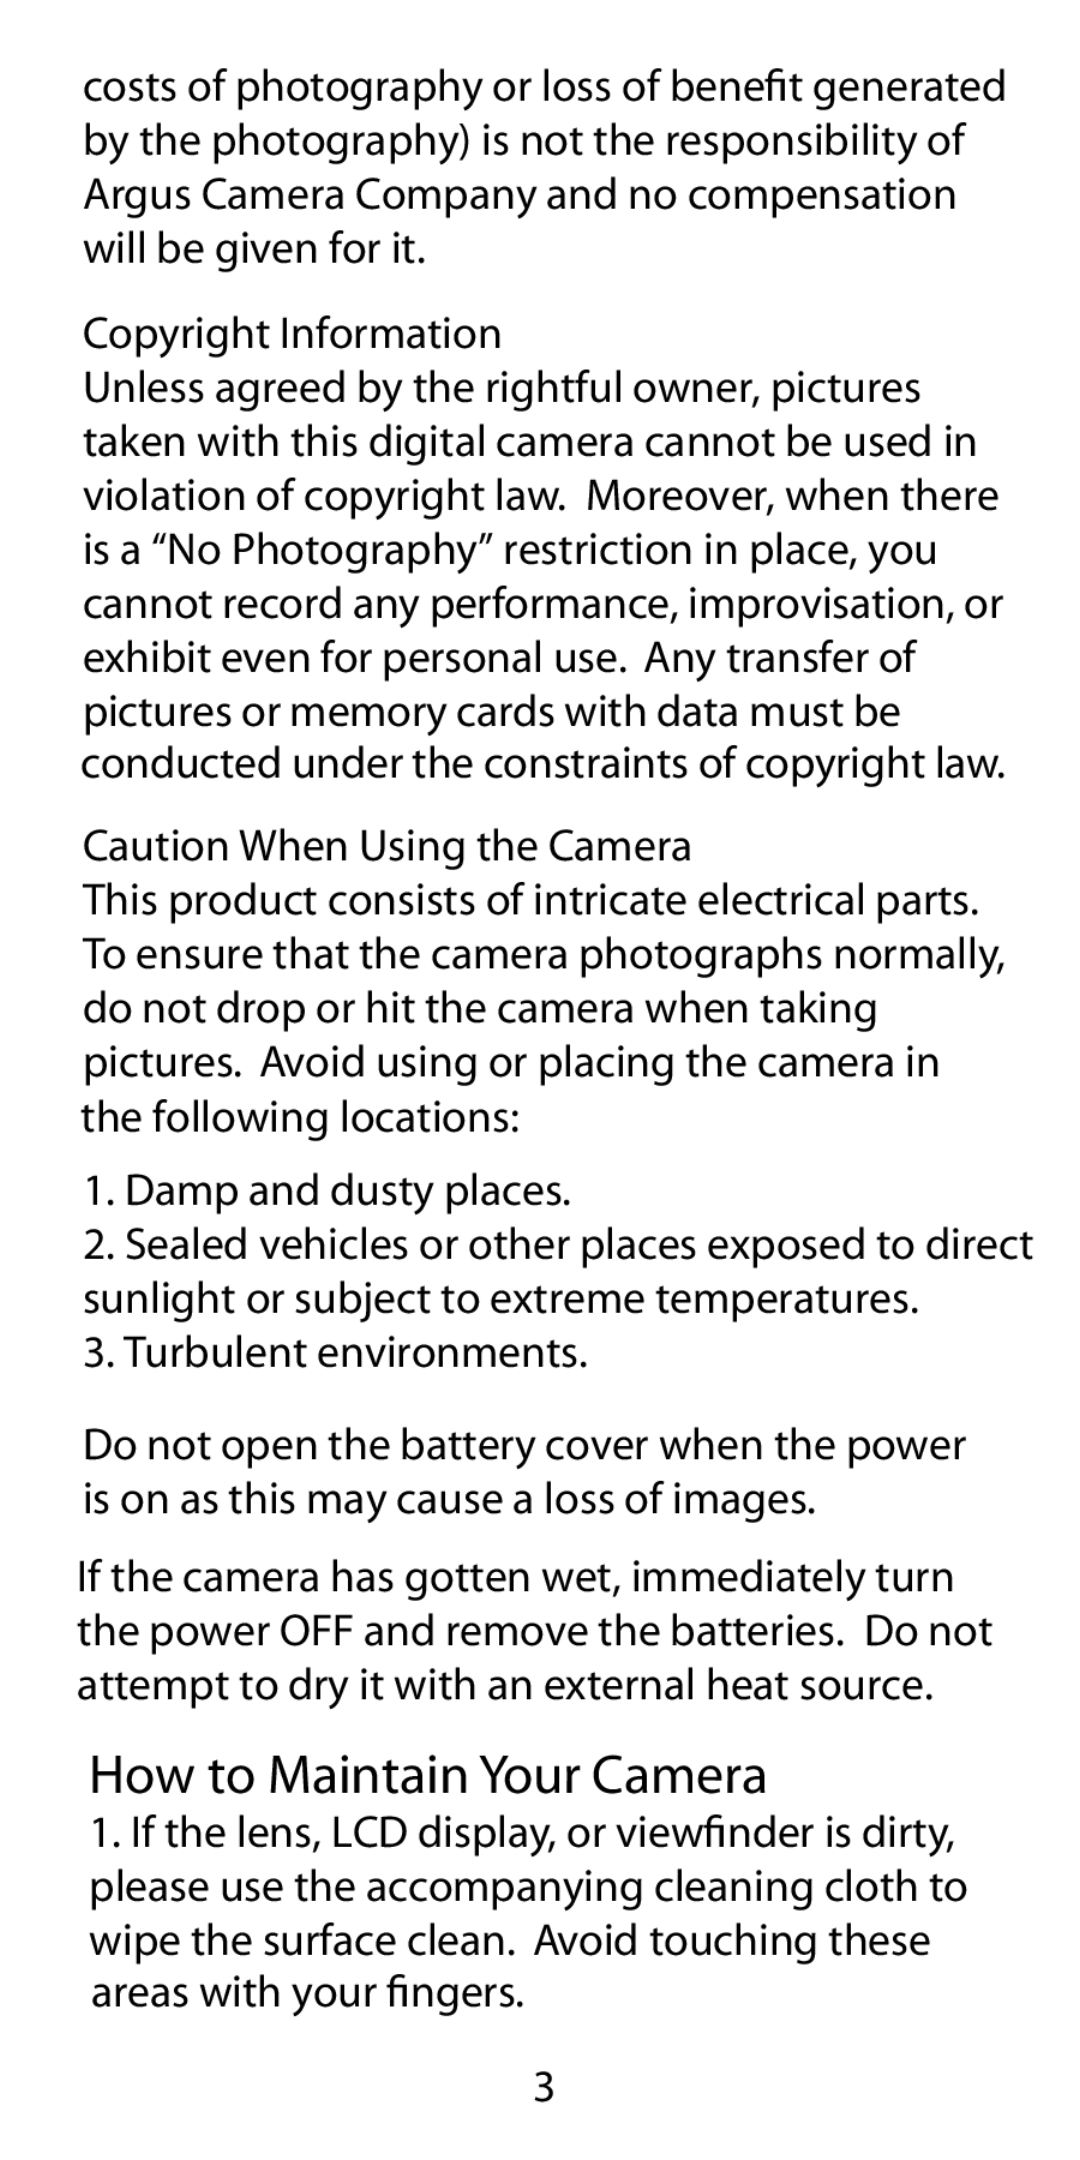 Argus Camera DC-3190 manual How to Maintain Your Camera, Copyright Information, Caution When Using the Camera 